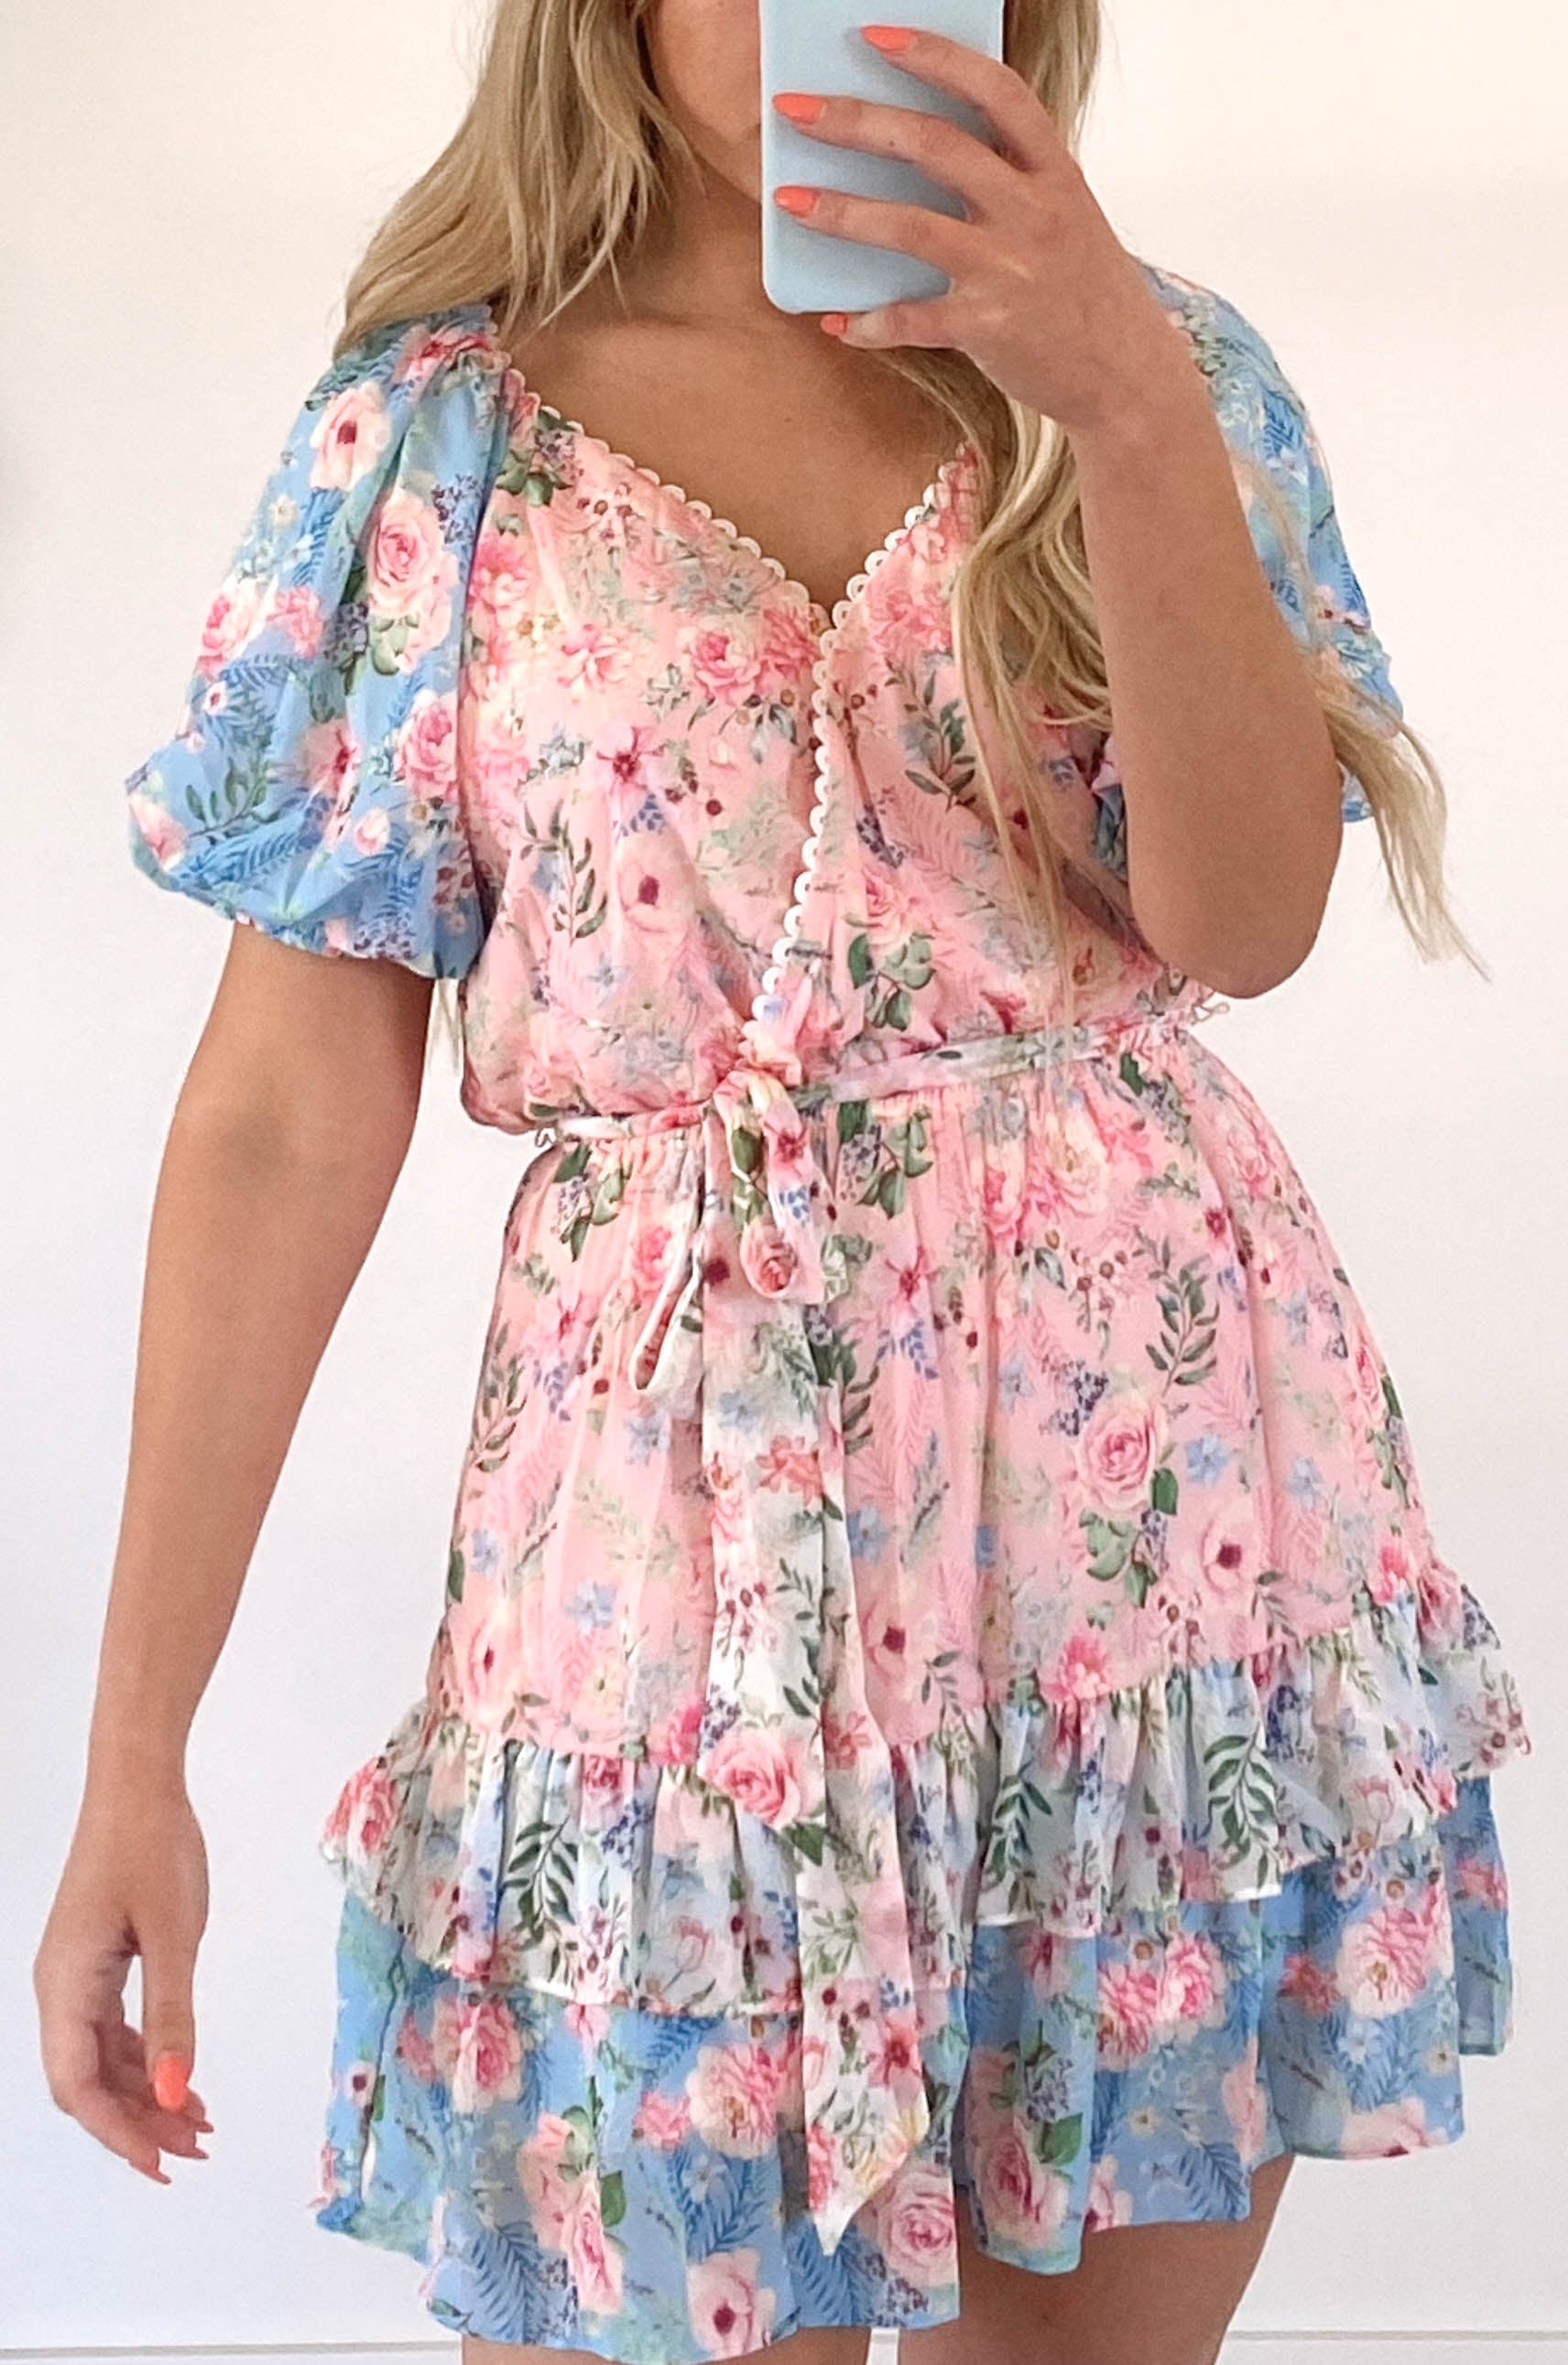 cute girly floral dress with pink and blue print